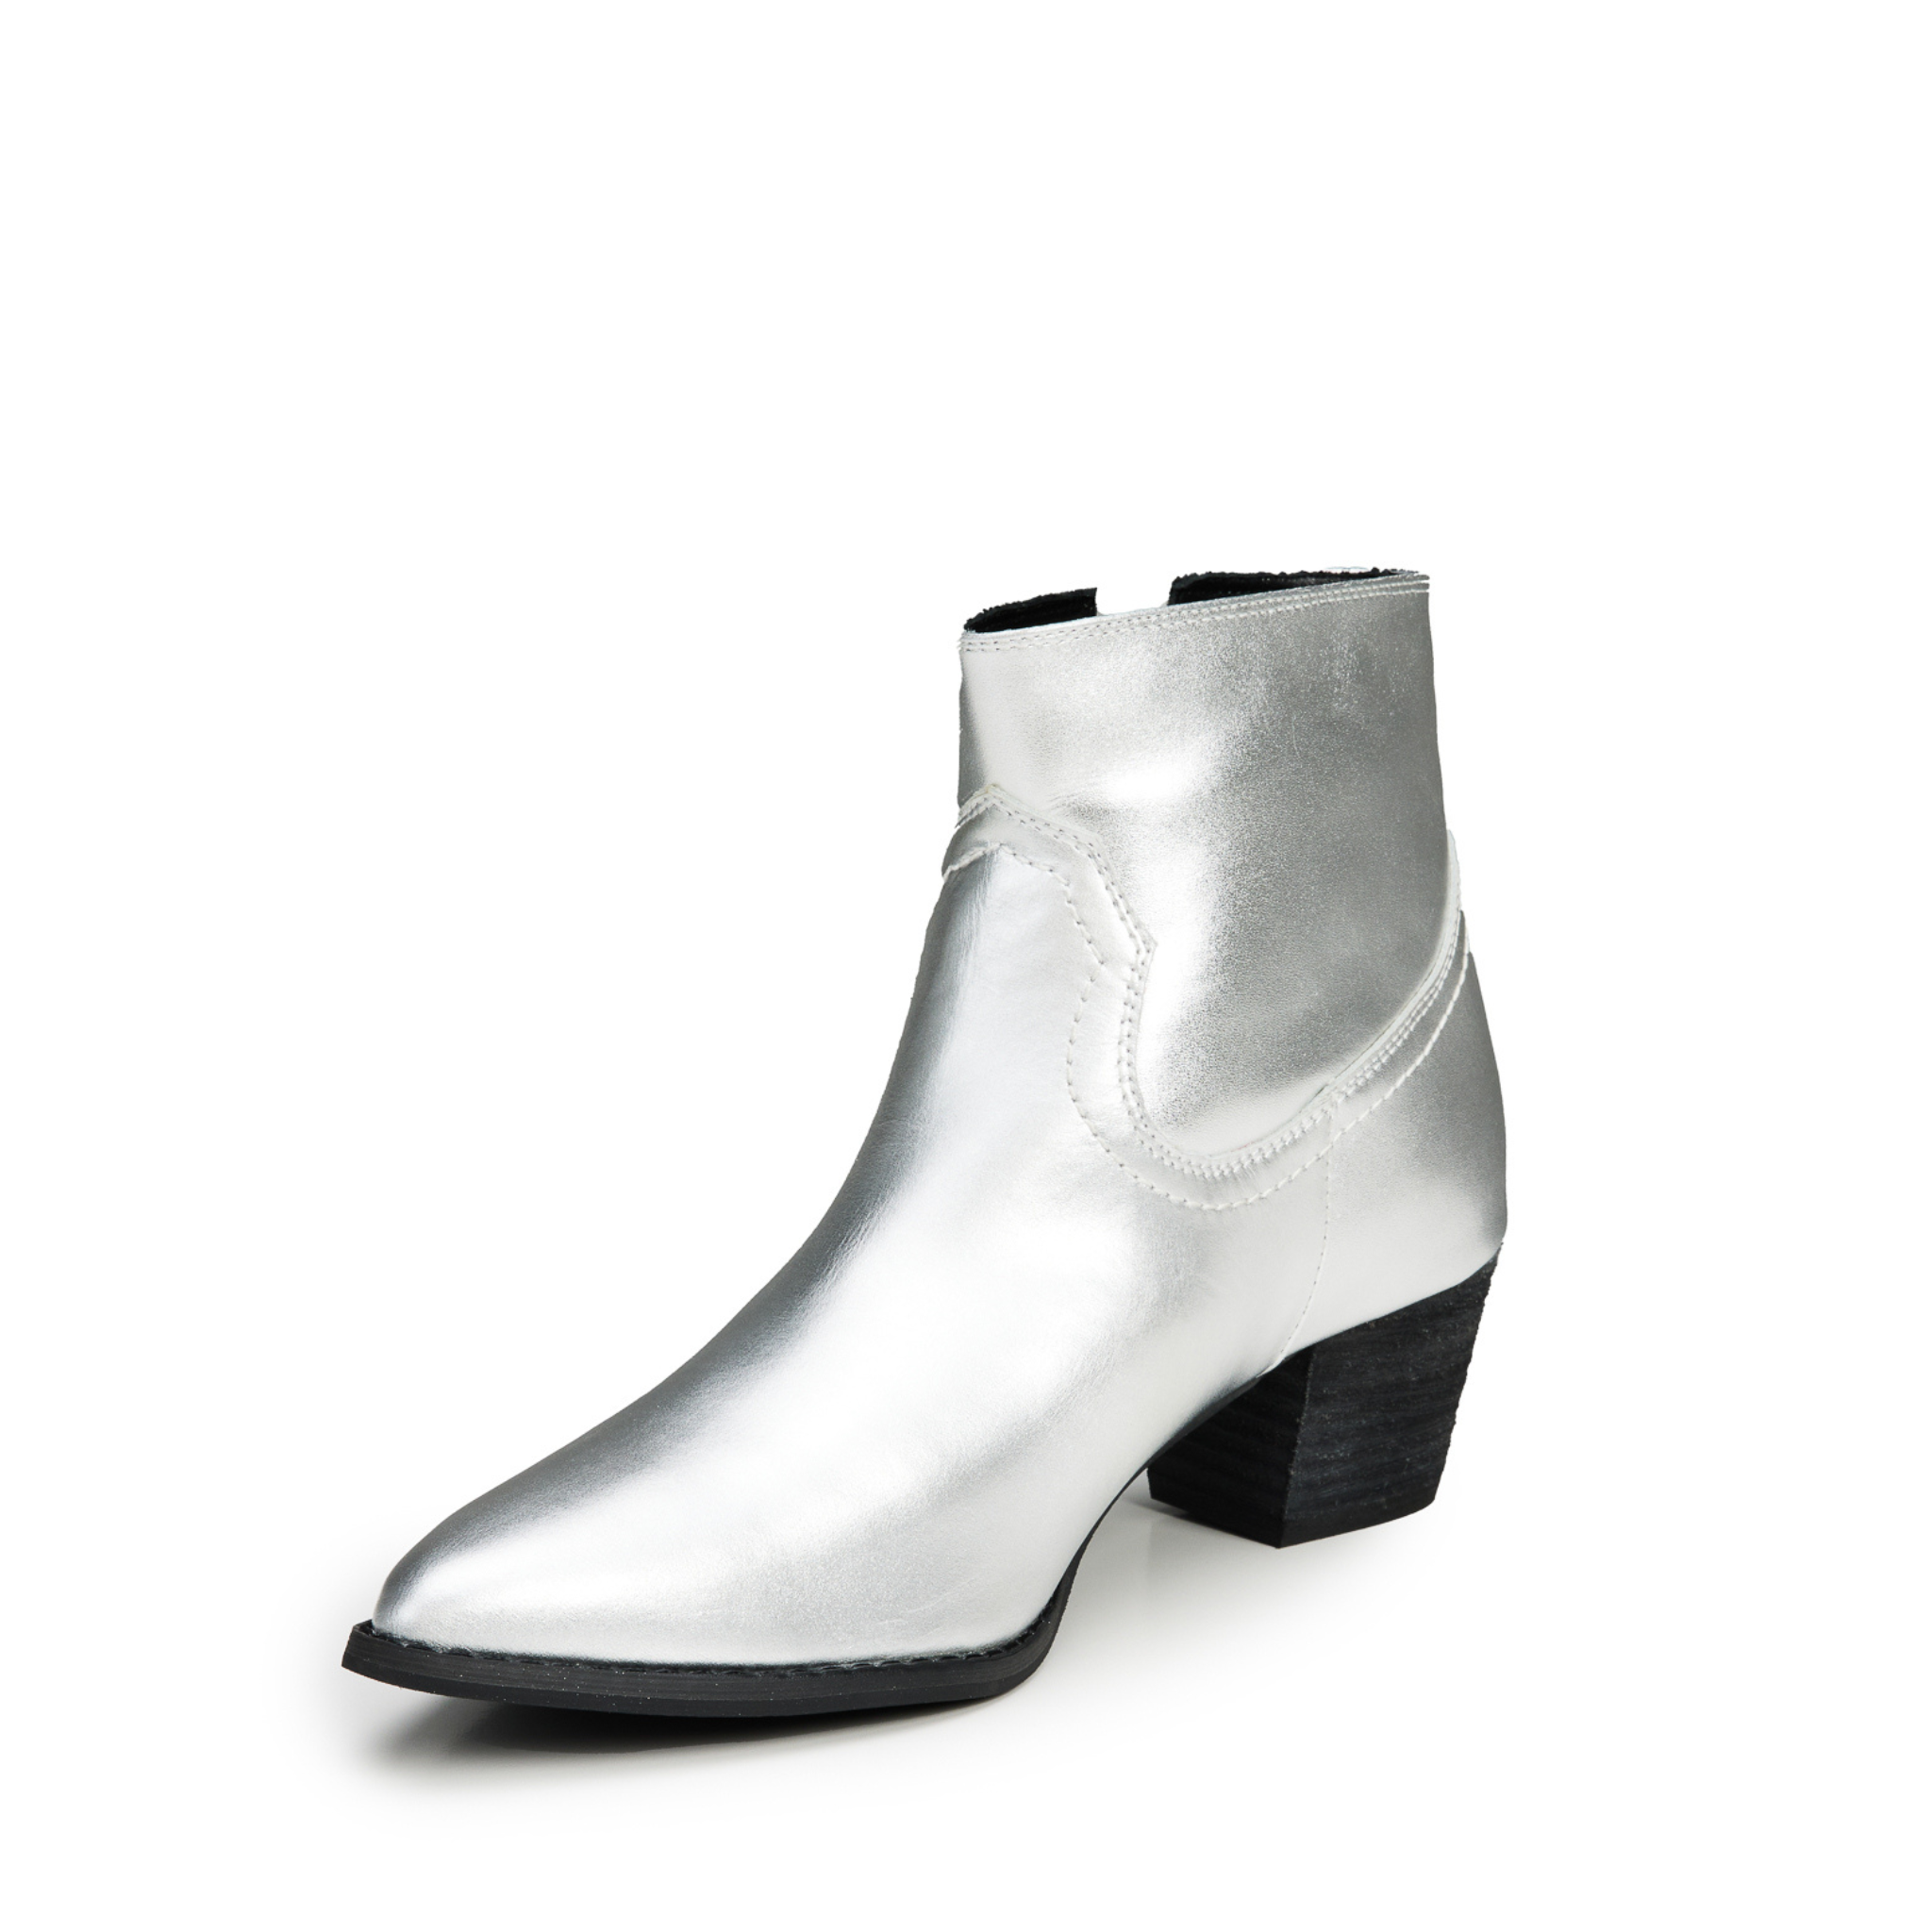 Mila Leather Low Block Heel Ankle Boots